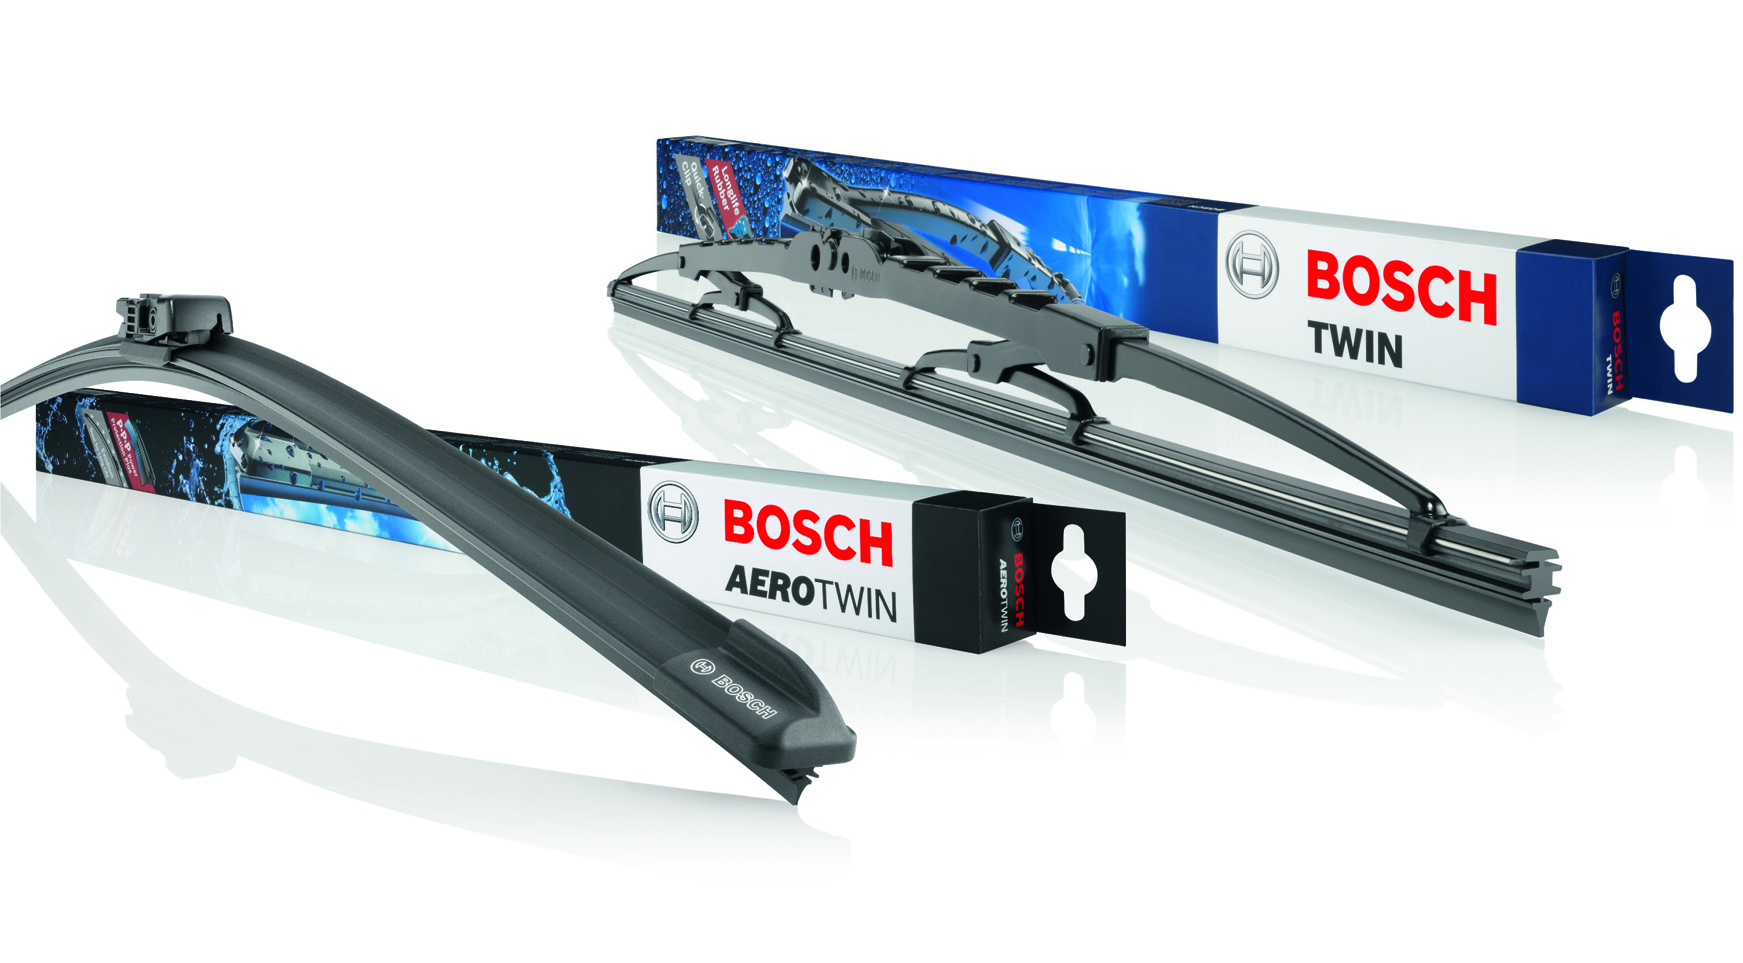 https://www.bosch.fr/media/news/aa_aerotwin_campagne/mkw_aerotwinr_twin_group_picture_cd2016_76548.jpg